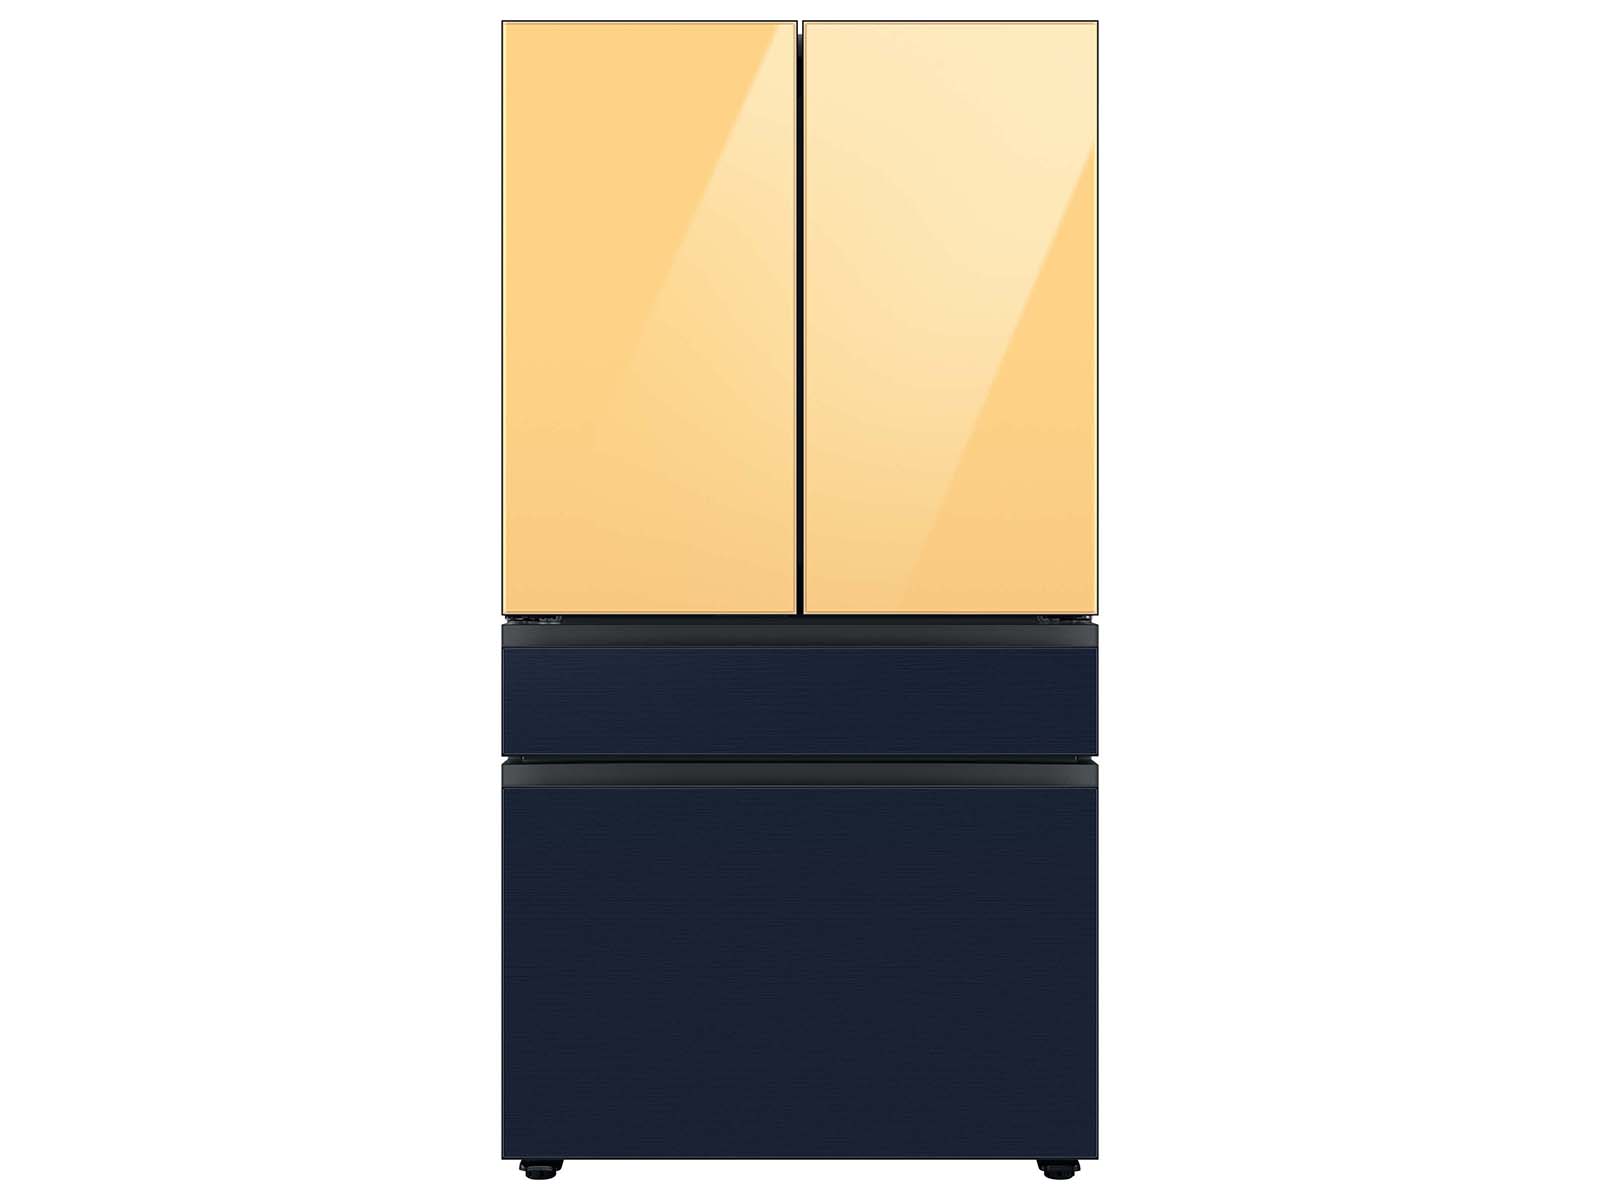 Bespoke 4-Door French Door Refrigerator (23 cu. ft.) with Customizable Door Panel Colors and Beverage Center™ in Sunrise Yellow Glass Top, White Glass Middle, and Morning Blue Glass Bottom Panels